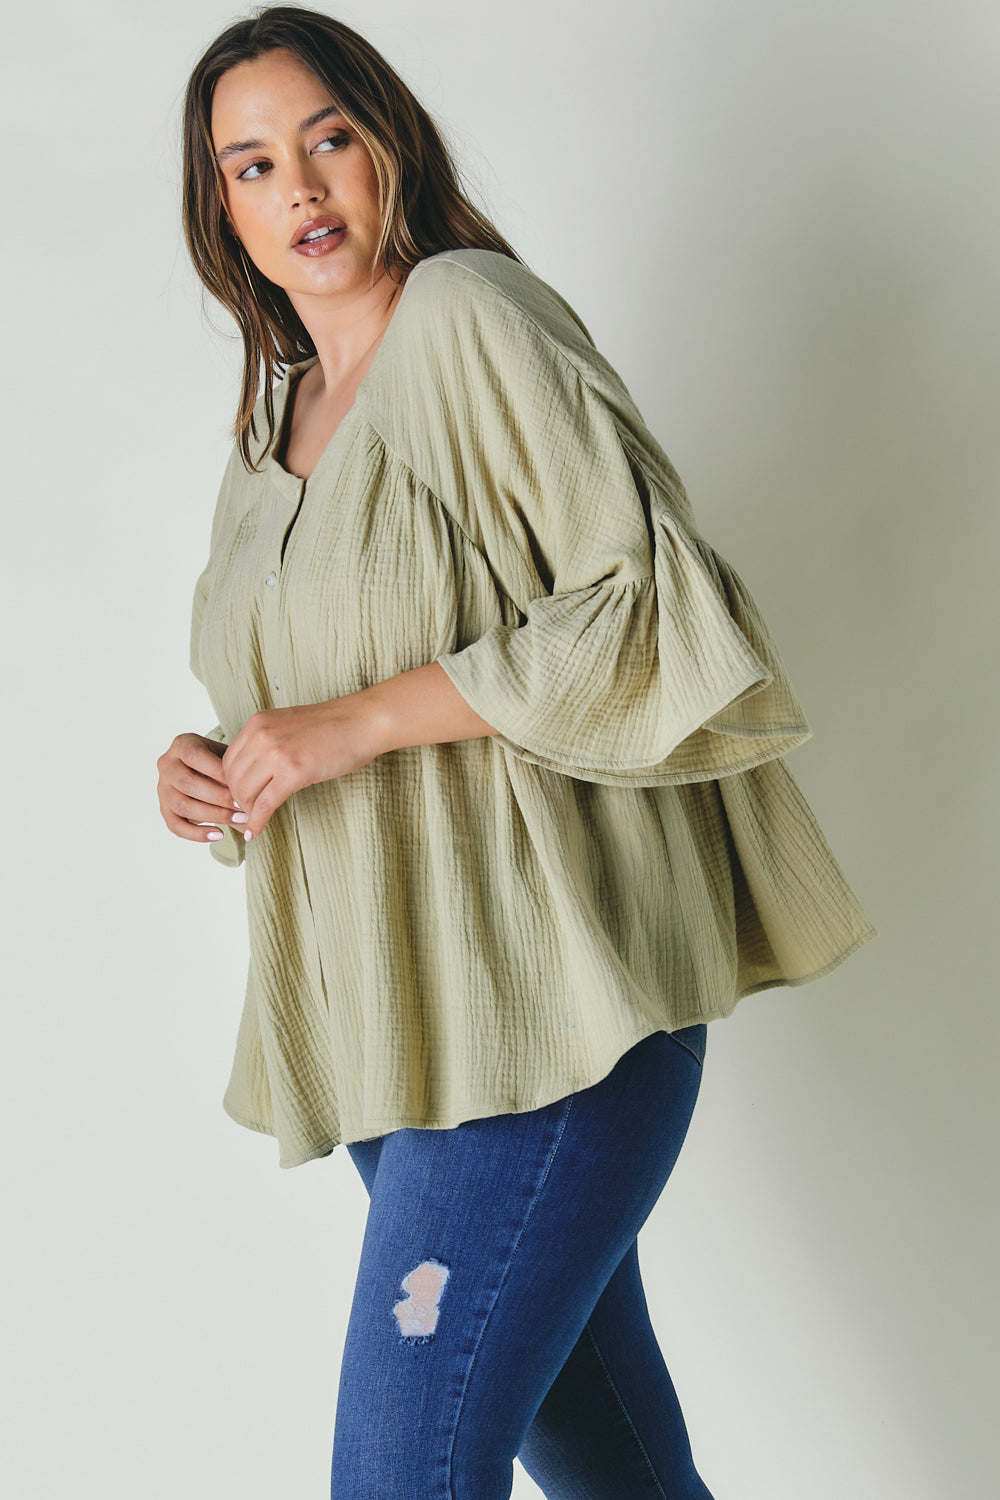 Plus Solid V Neck Button Down Top Plus Solid V Neck Button Down Top - M&R CORNER M&R CORNER